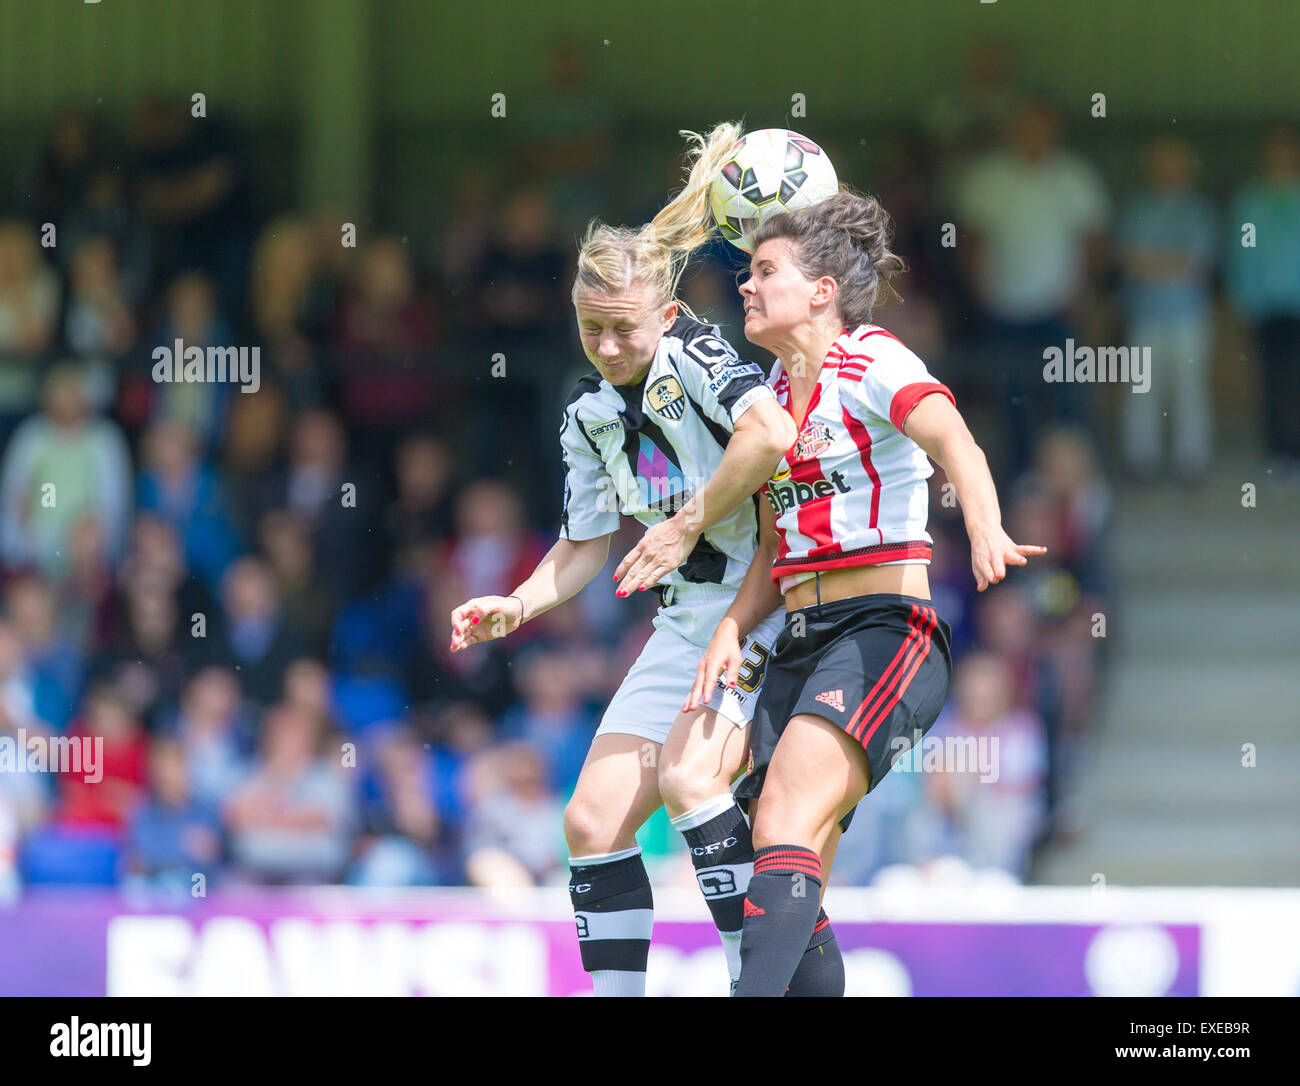 Hetton Centre, Sunderland, UK. 12th July, 2015. The FA Women's Super League Football, Sunderland versus Notts County Ladies. Notts and England captain Laura Bassett competes for the ball. © Action Plus Sports/Alamy Live News Stock Photo